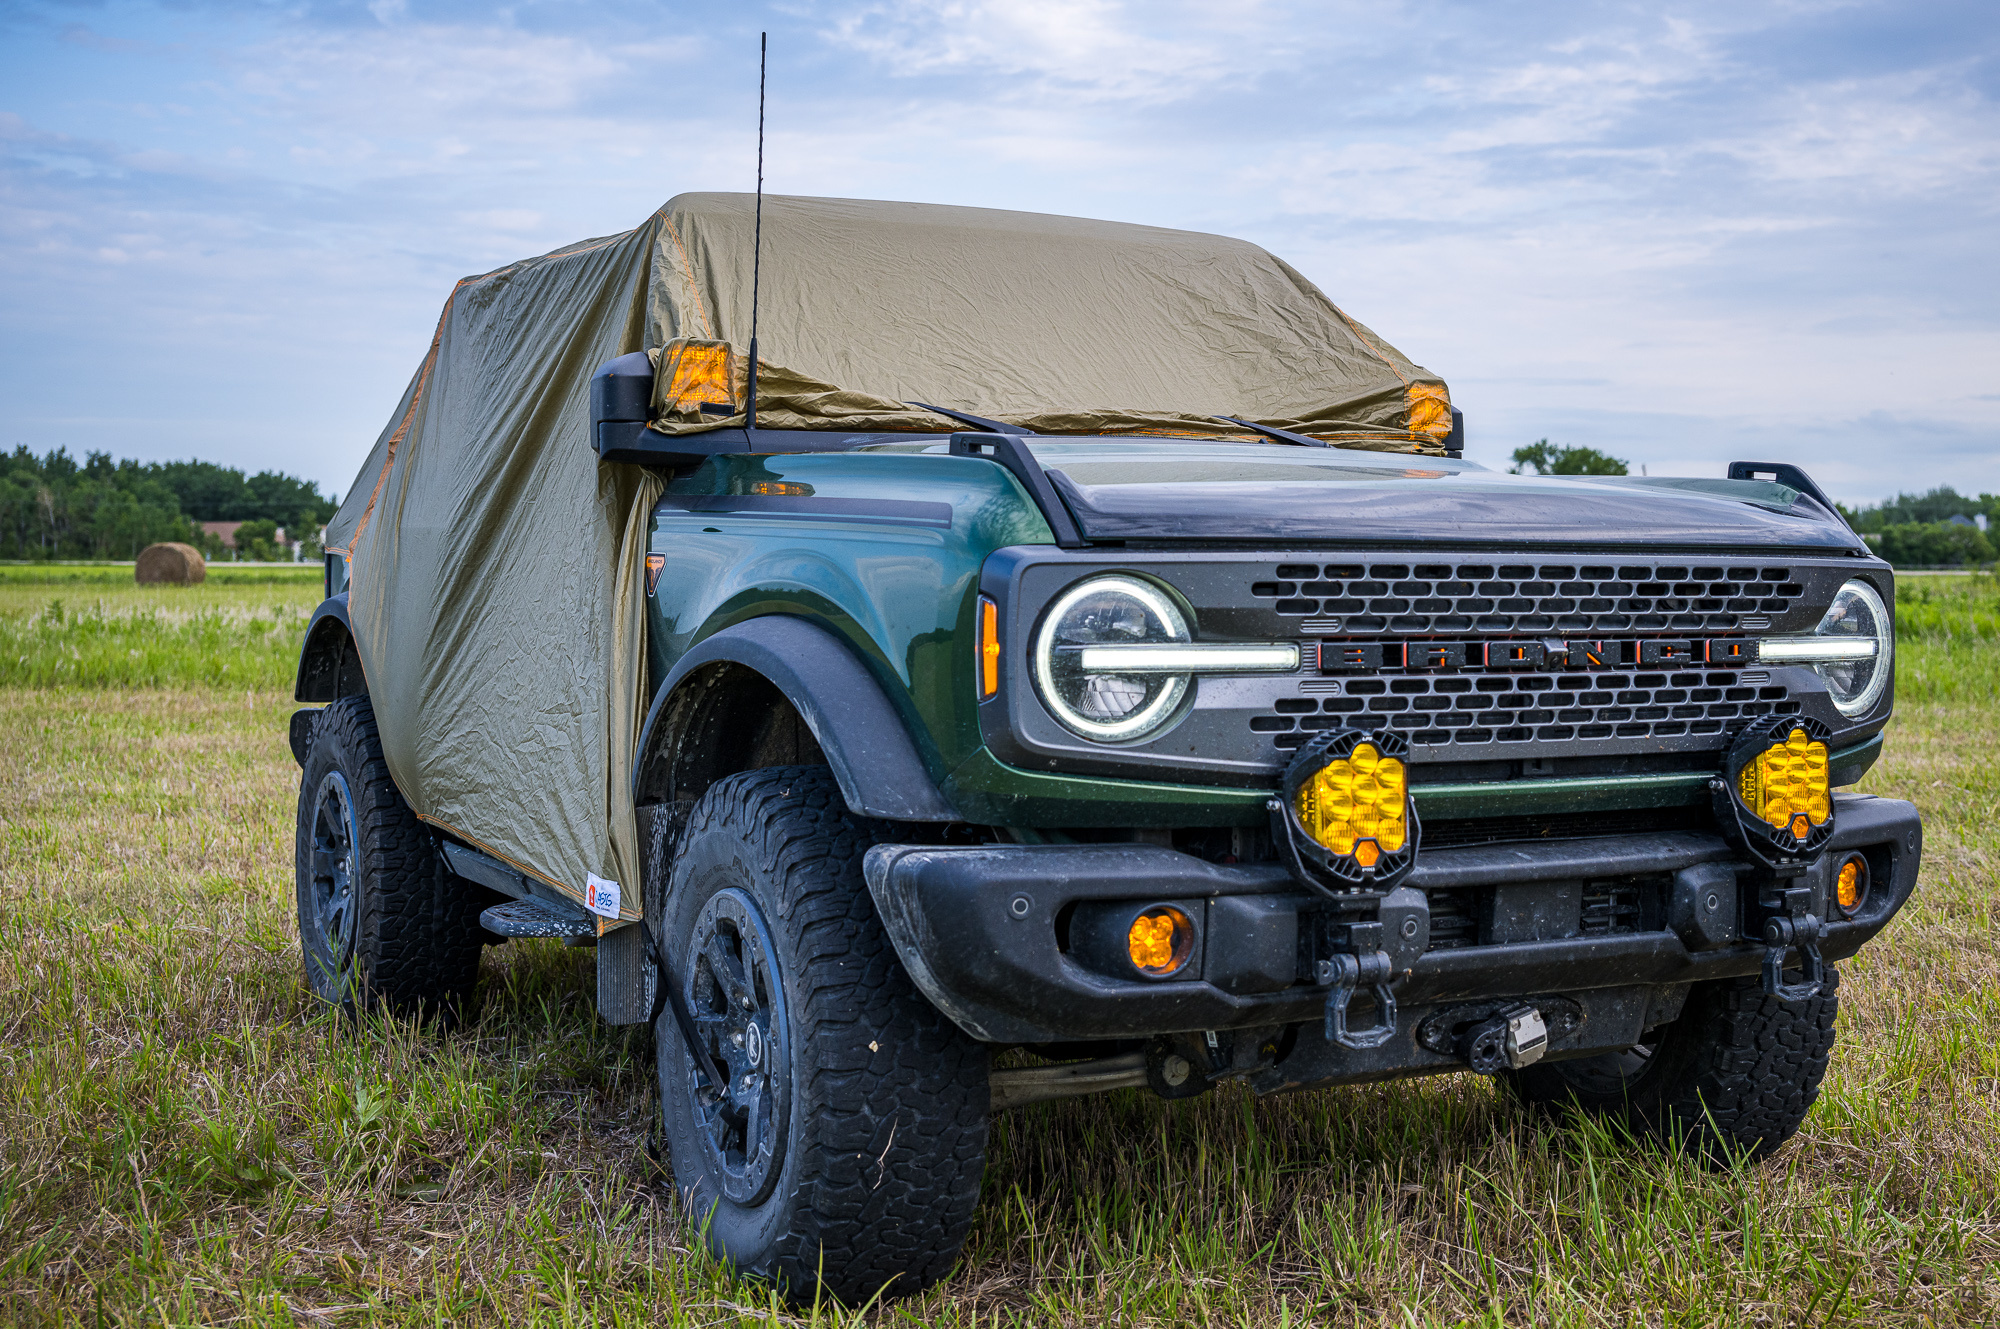 Ford Bronco 2 DR Trail Gear Oasis Trail Cover Review/Rundown July 12, 2023_8983-LR